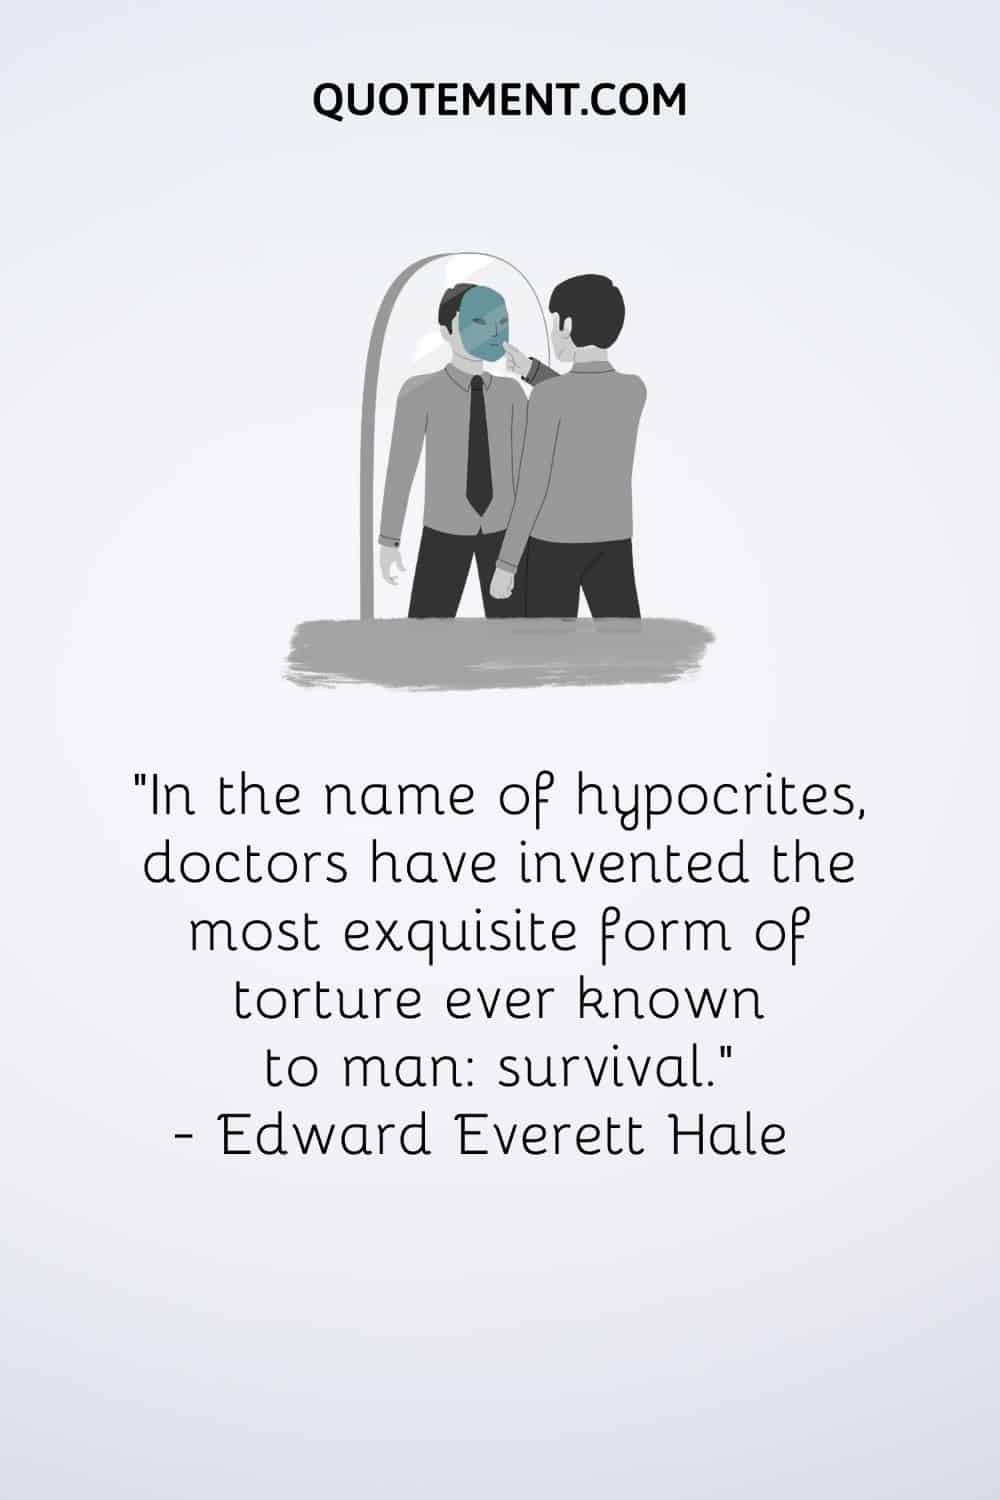 “In the name of hypocrites, doctors have invented the most exquisite form of torture ever known to man survival.” — Edward Everett Hale